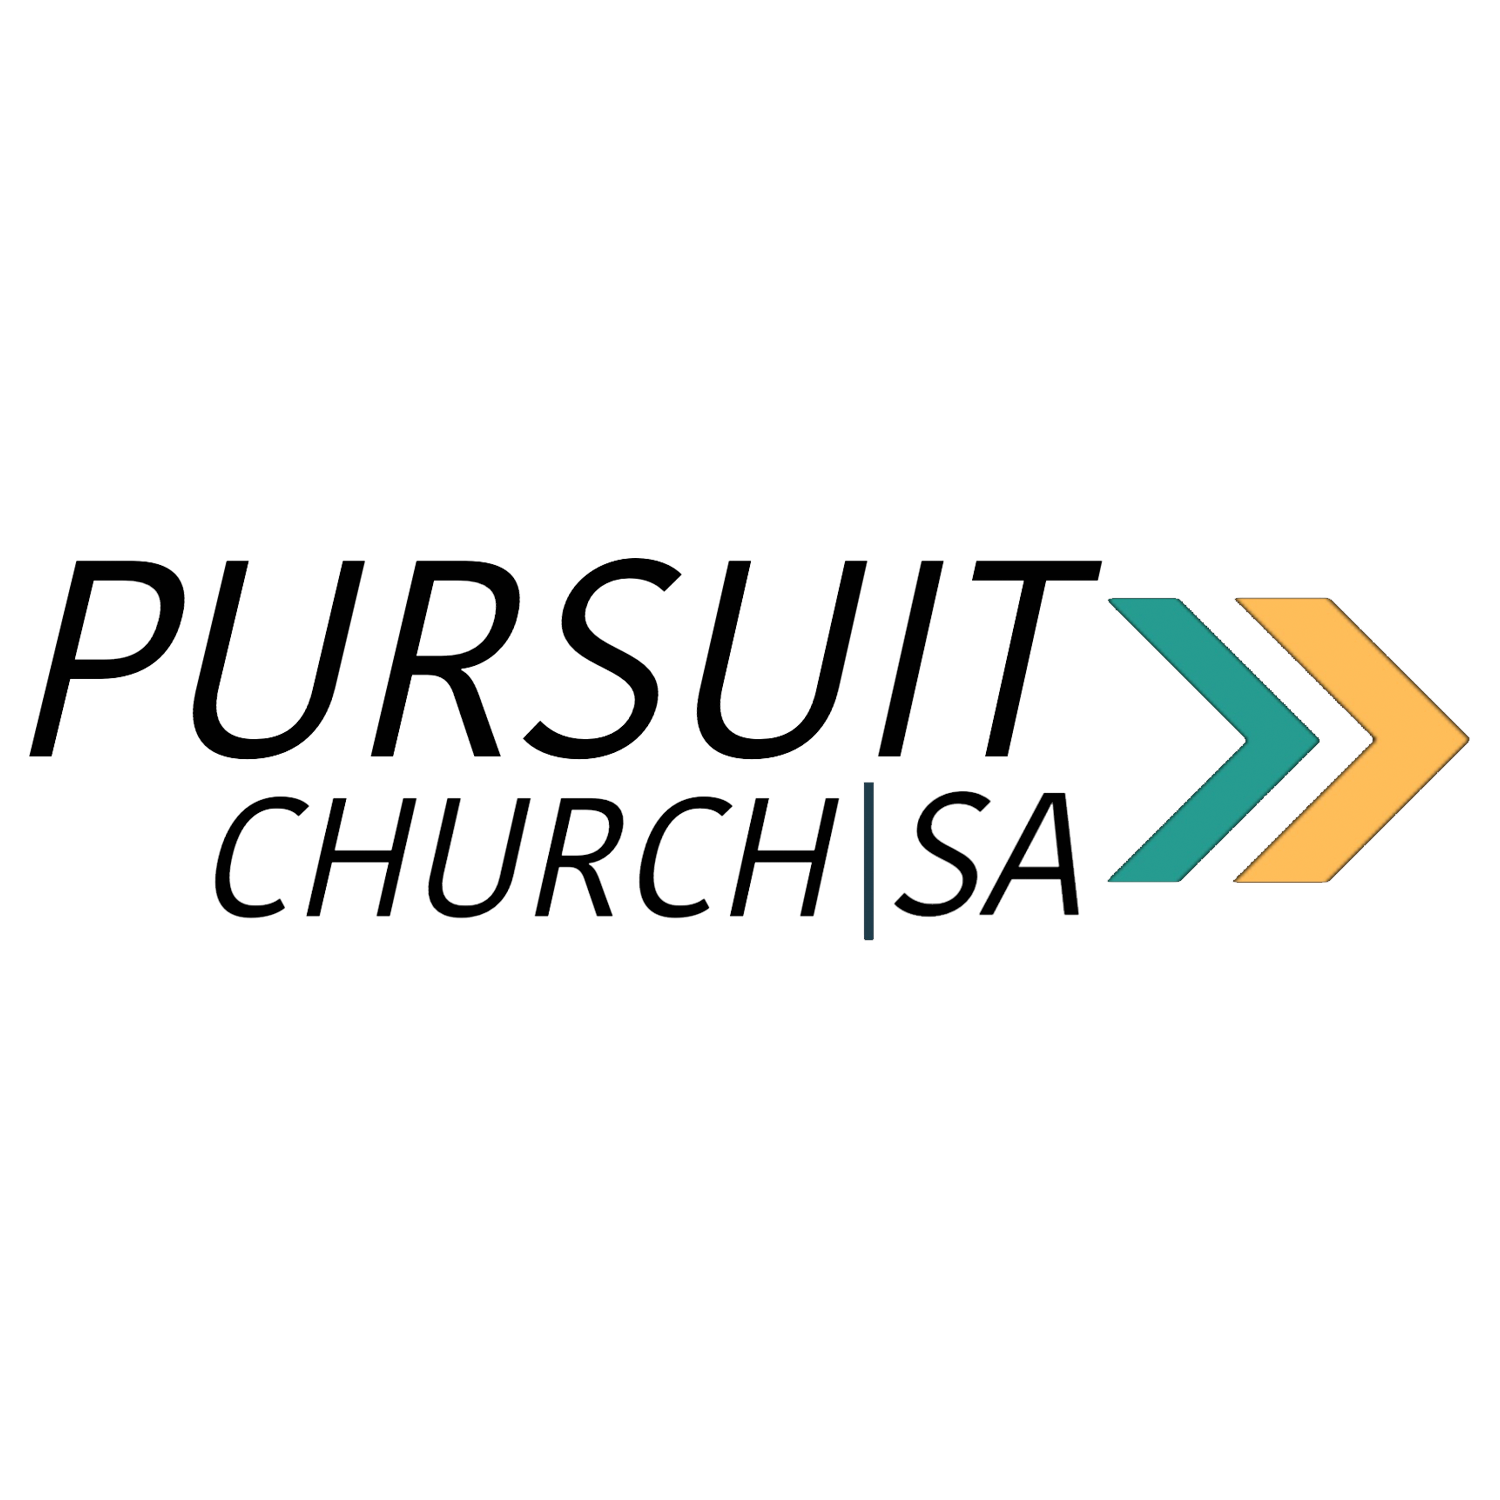 Pursue Vision - Making a Difference